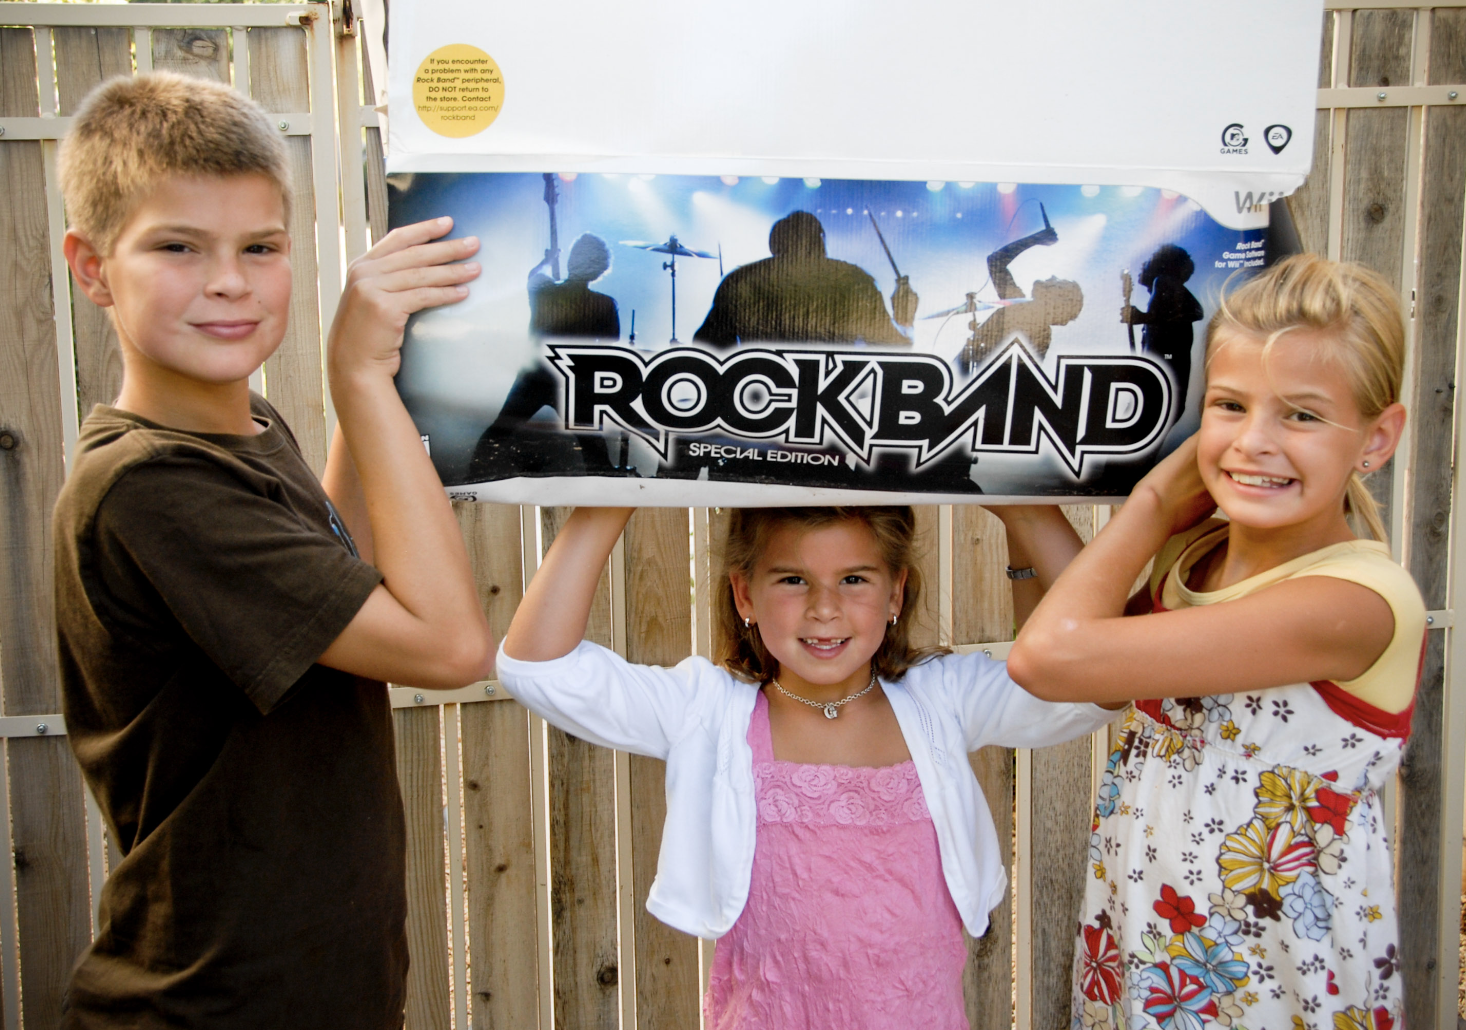 Max, Elle and Grace holding up Rockband